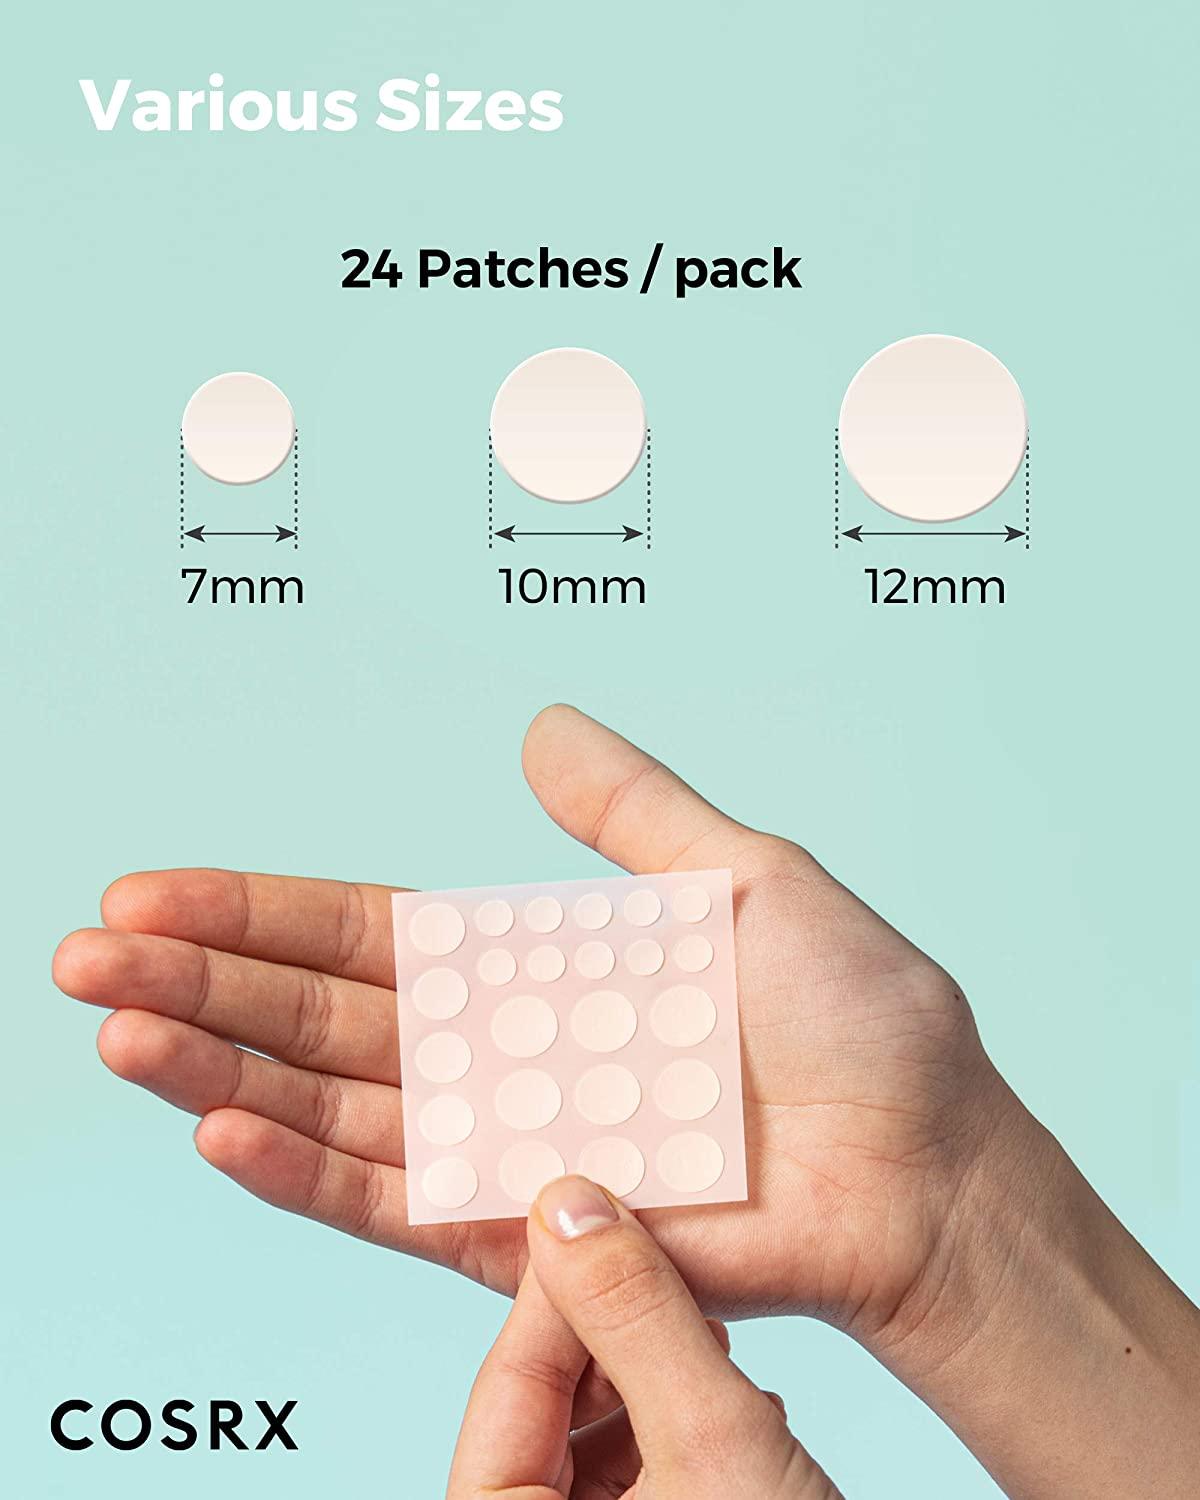 Cosrx Acne Pimple Master Patch - Astrid & Rose